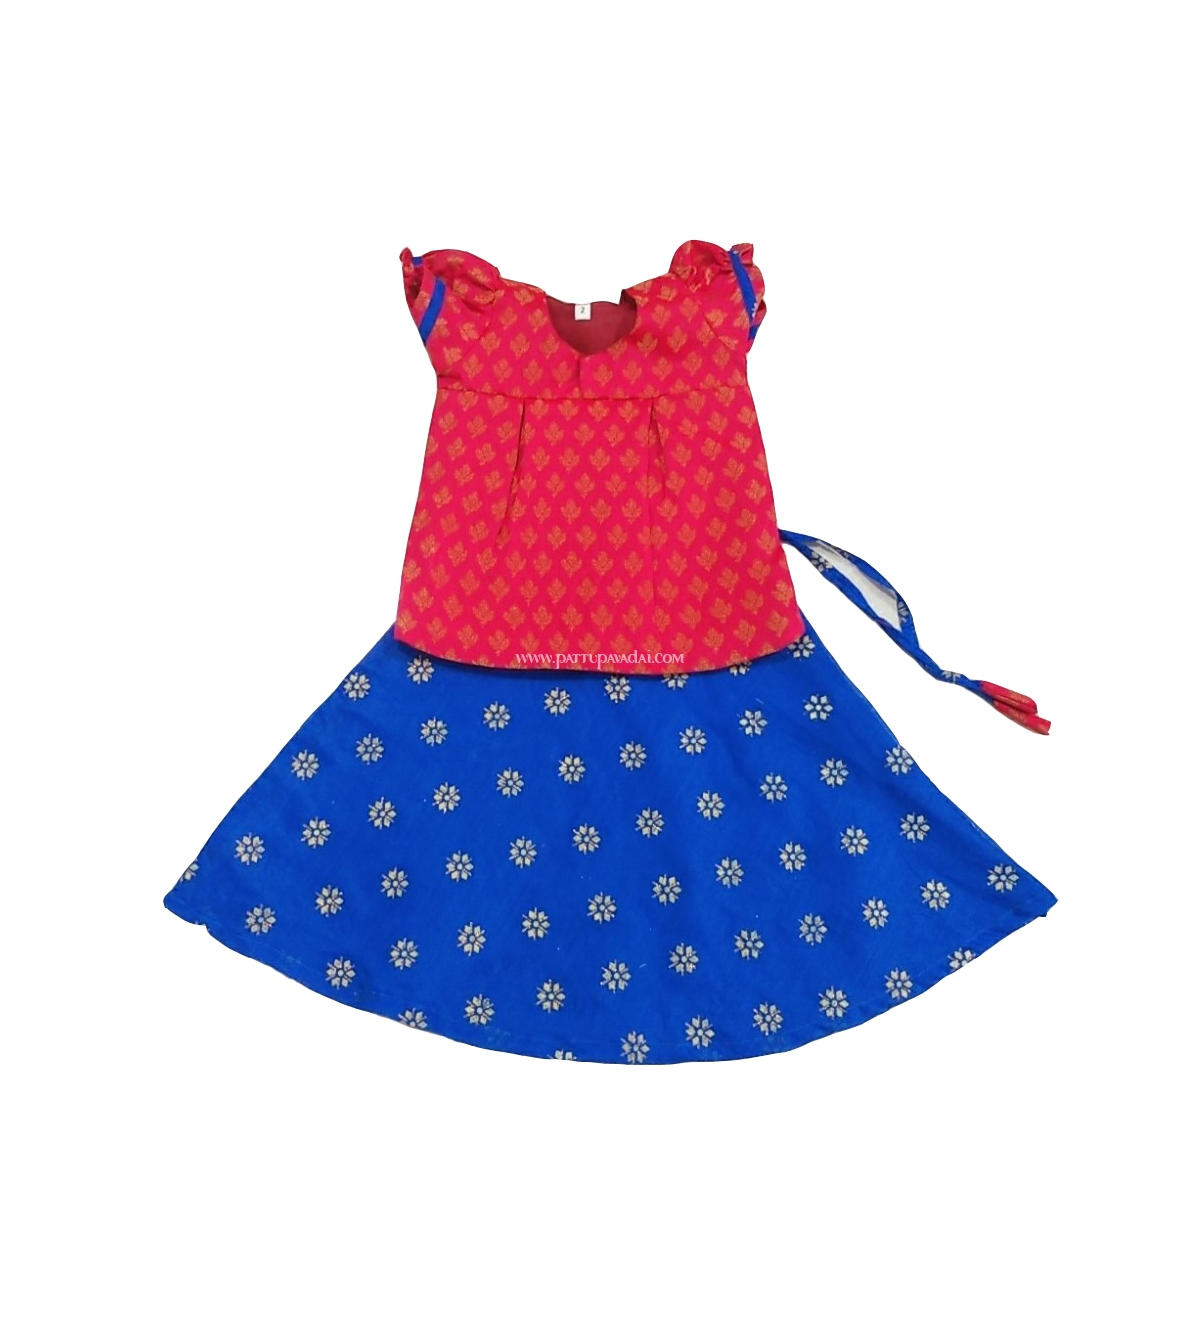 Fancy Pavadai Set for Toddlers - Red and Blue